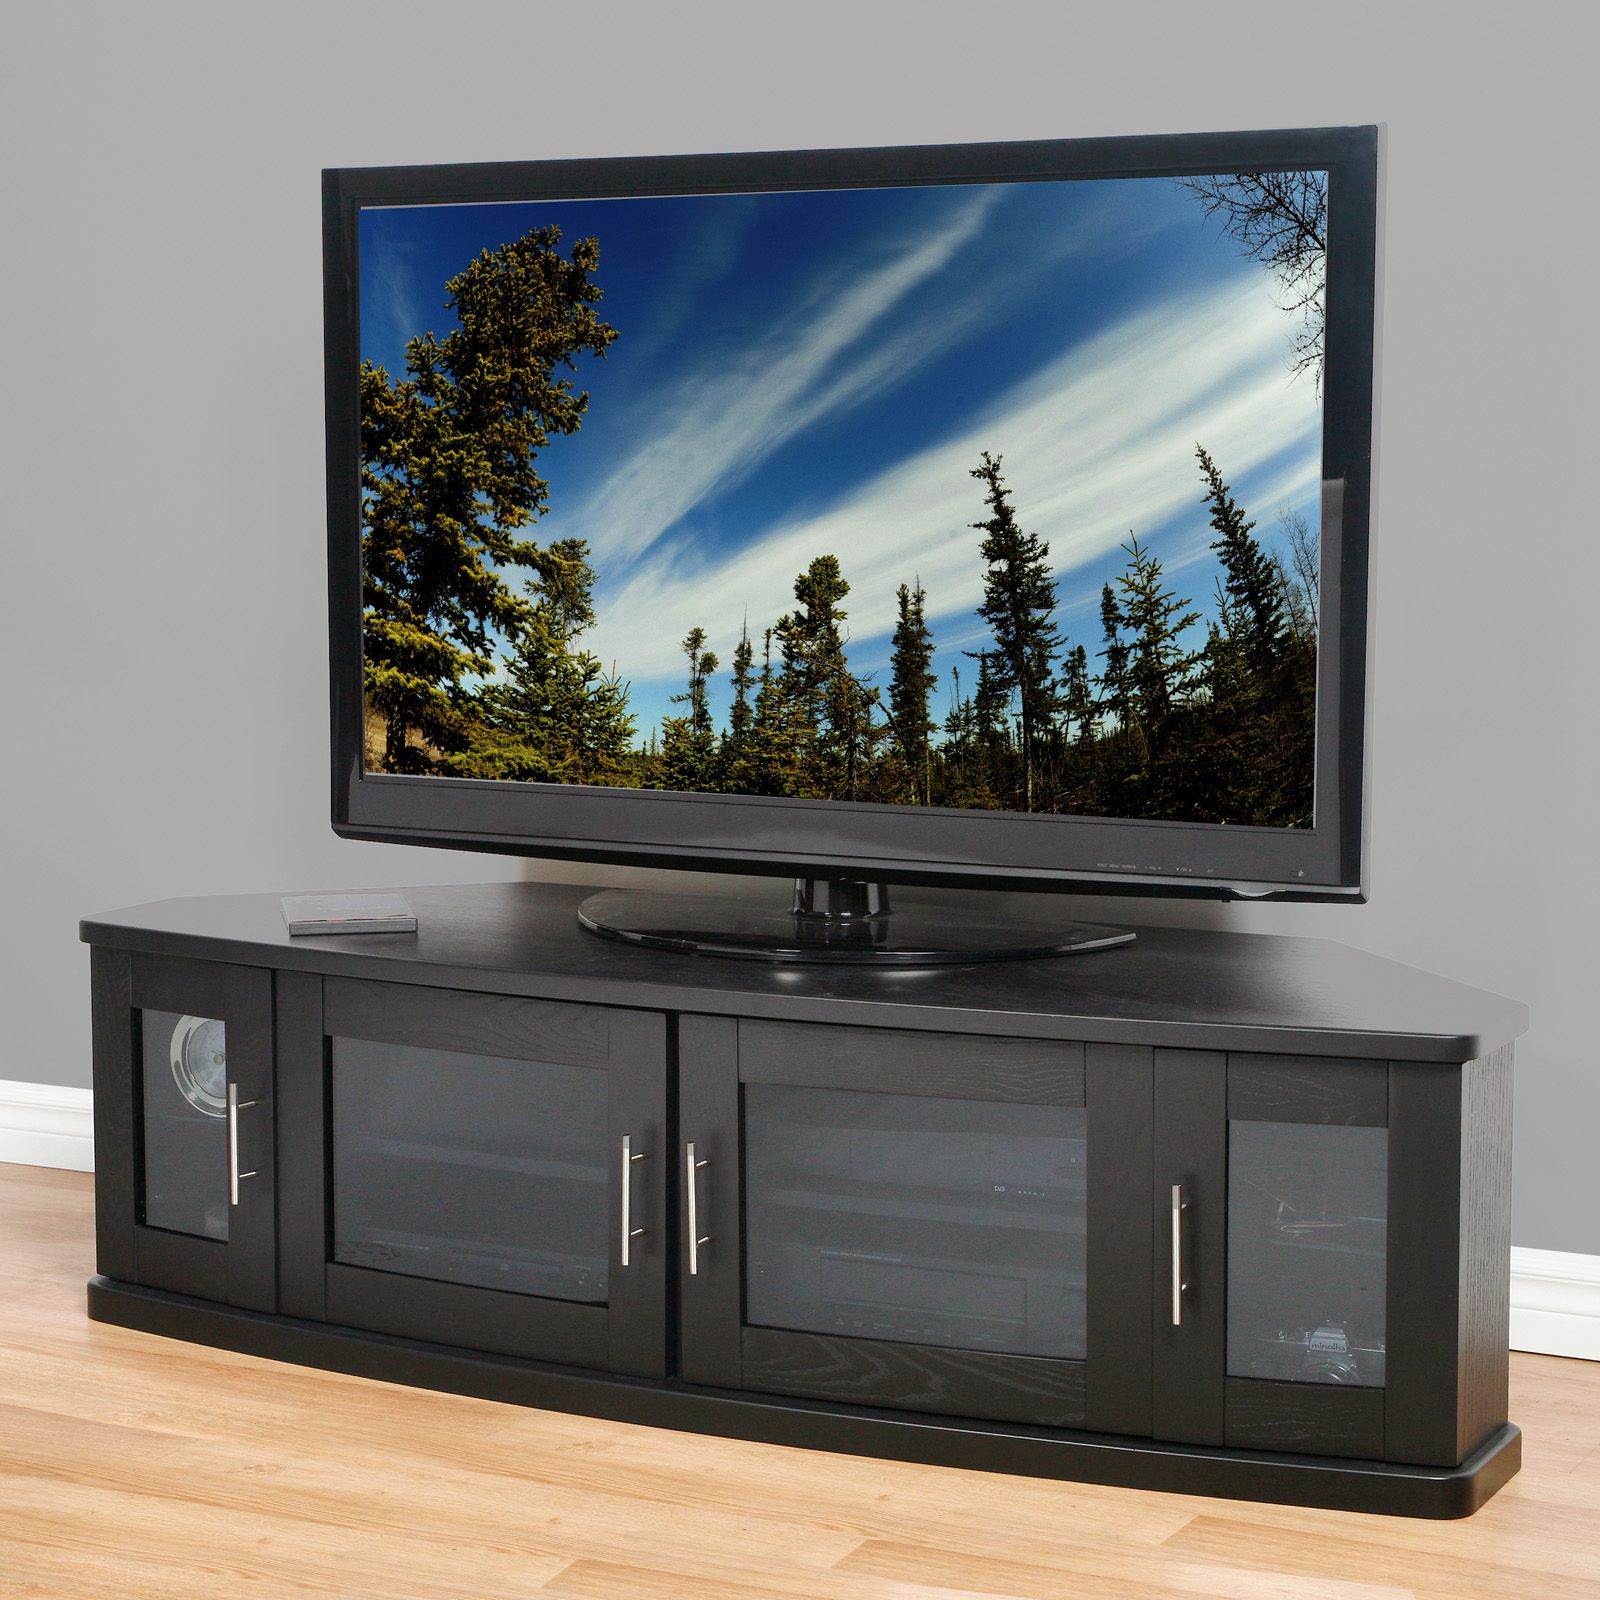 Plateau Newport 62 Inch Corner Tv Stand In Black – Tv Within Corner Tv Stands For 60 Inch Flat Screens (View 5 of 15)